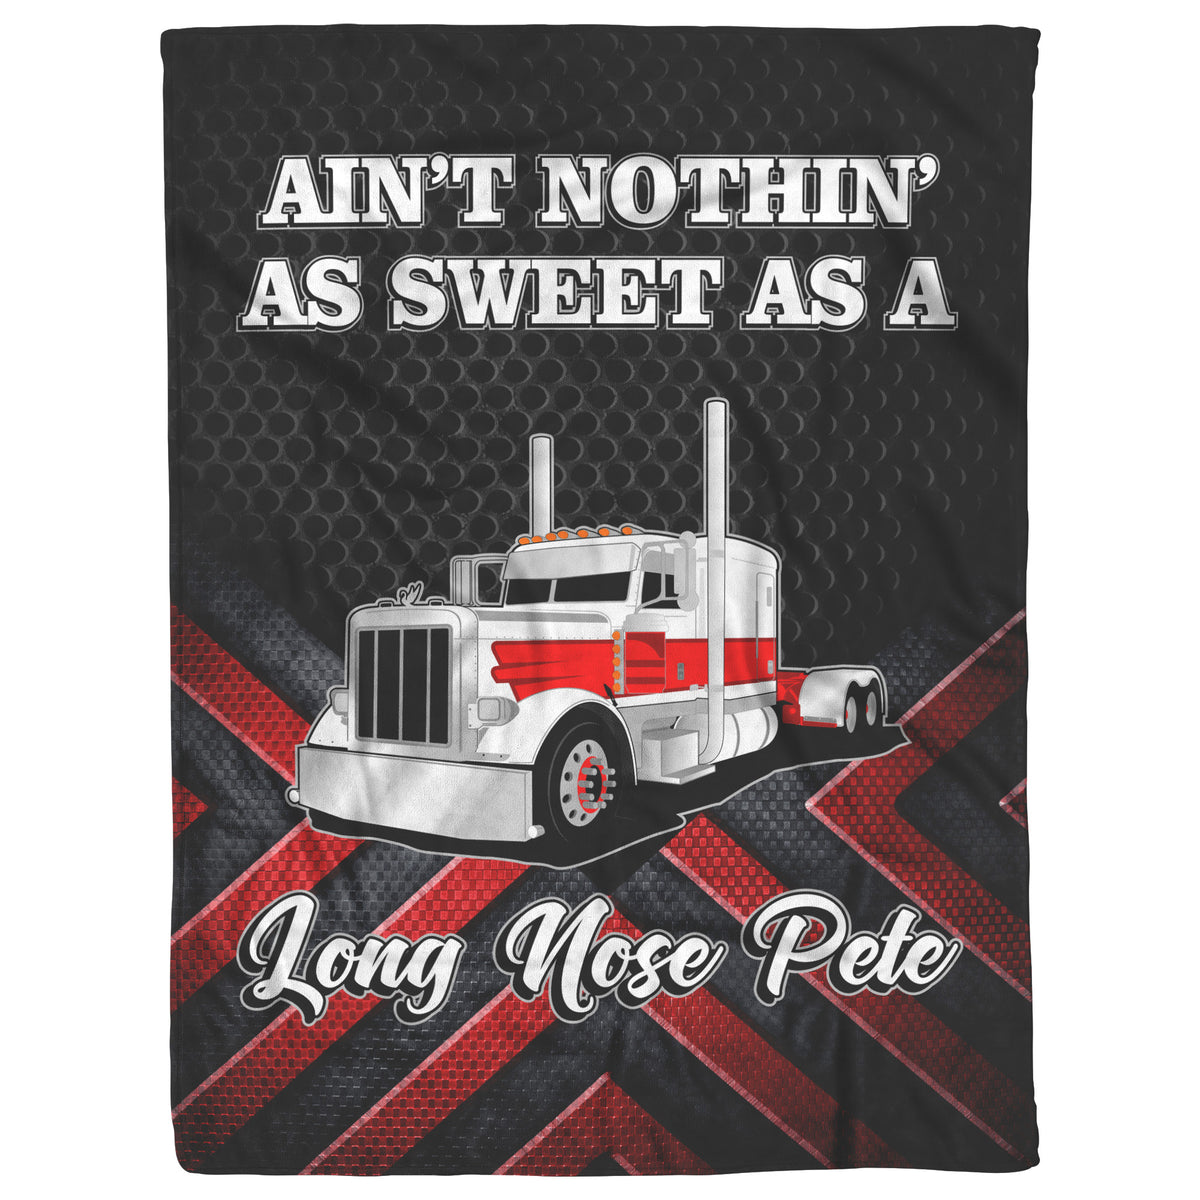 Ain't Nothin' As Sweet As a Long Nose Pete - Blanket